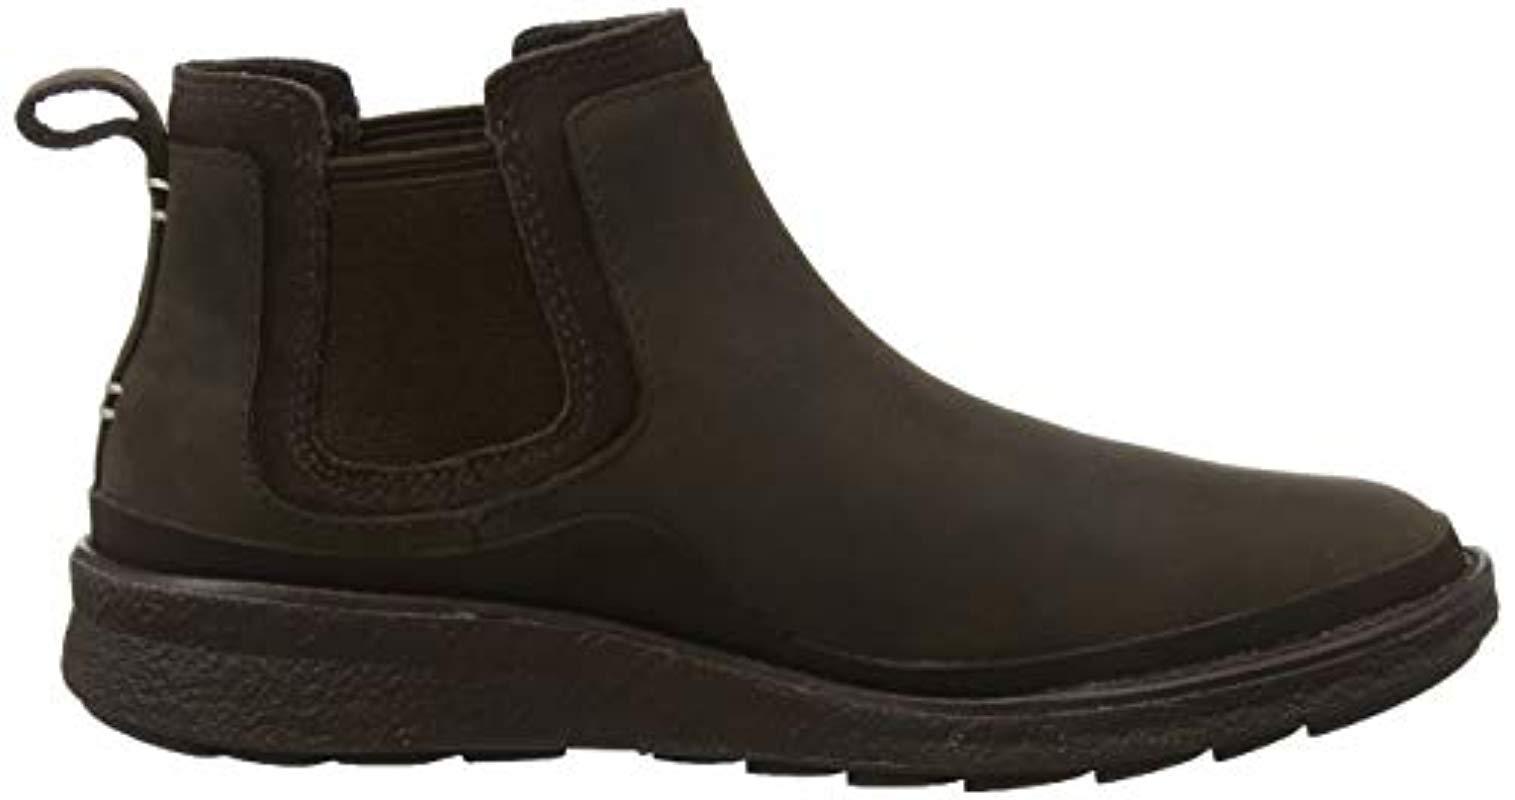 Merrell Leather Tremblant Ezra Chelsea Wp Boots in Brown (Espresso) (Brown)  - Lyst